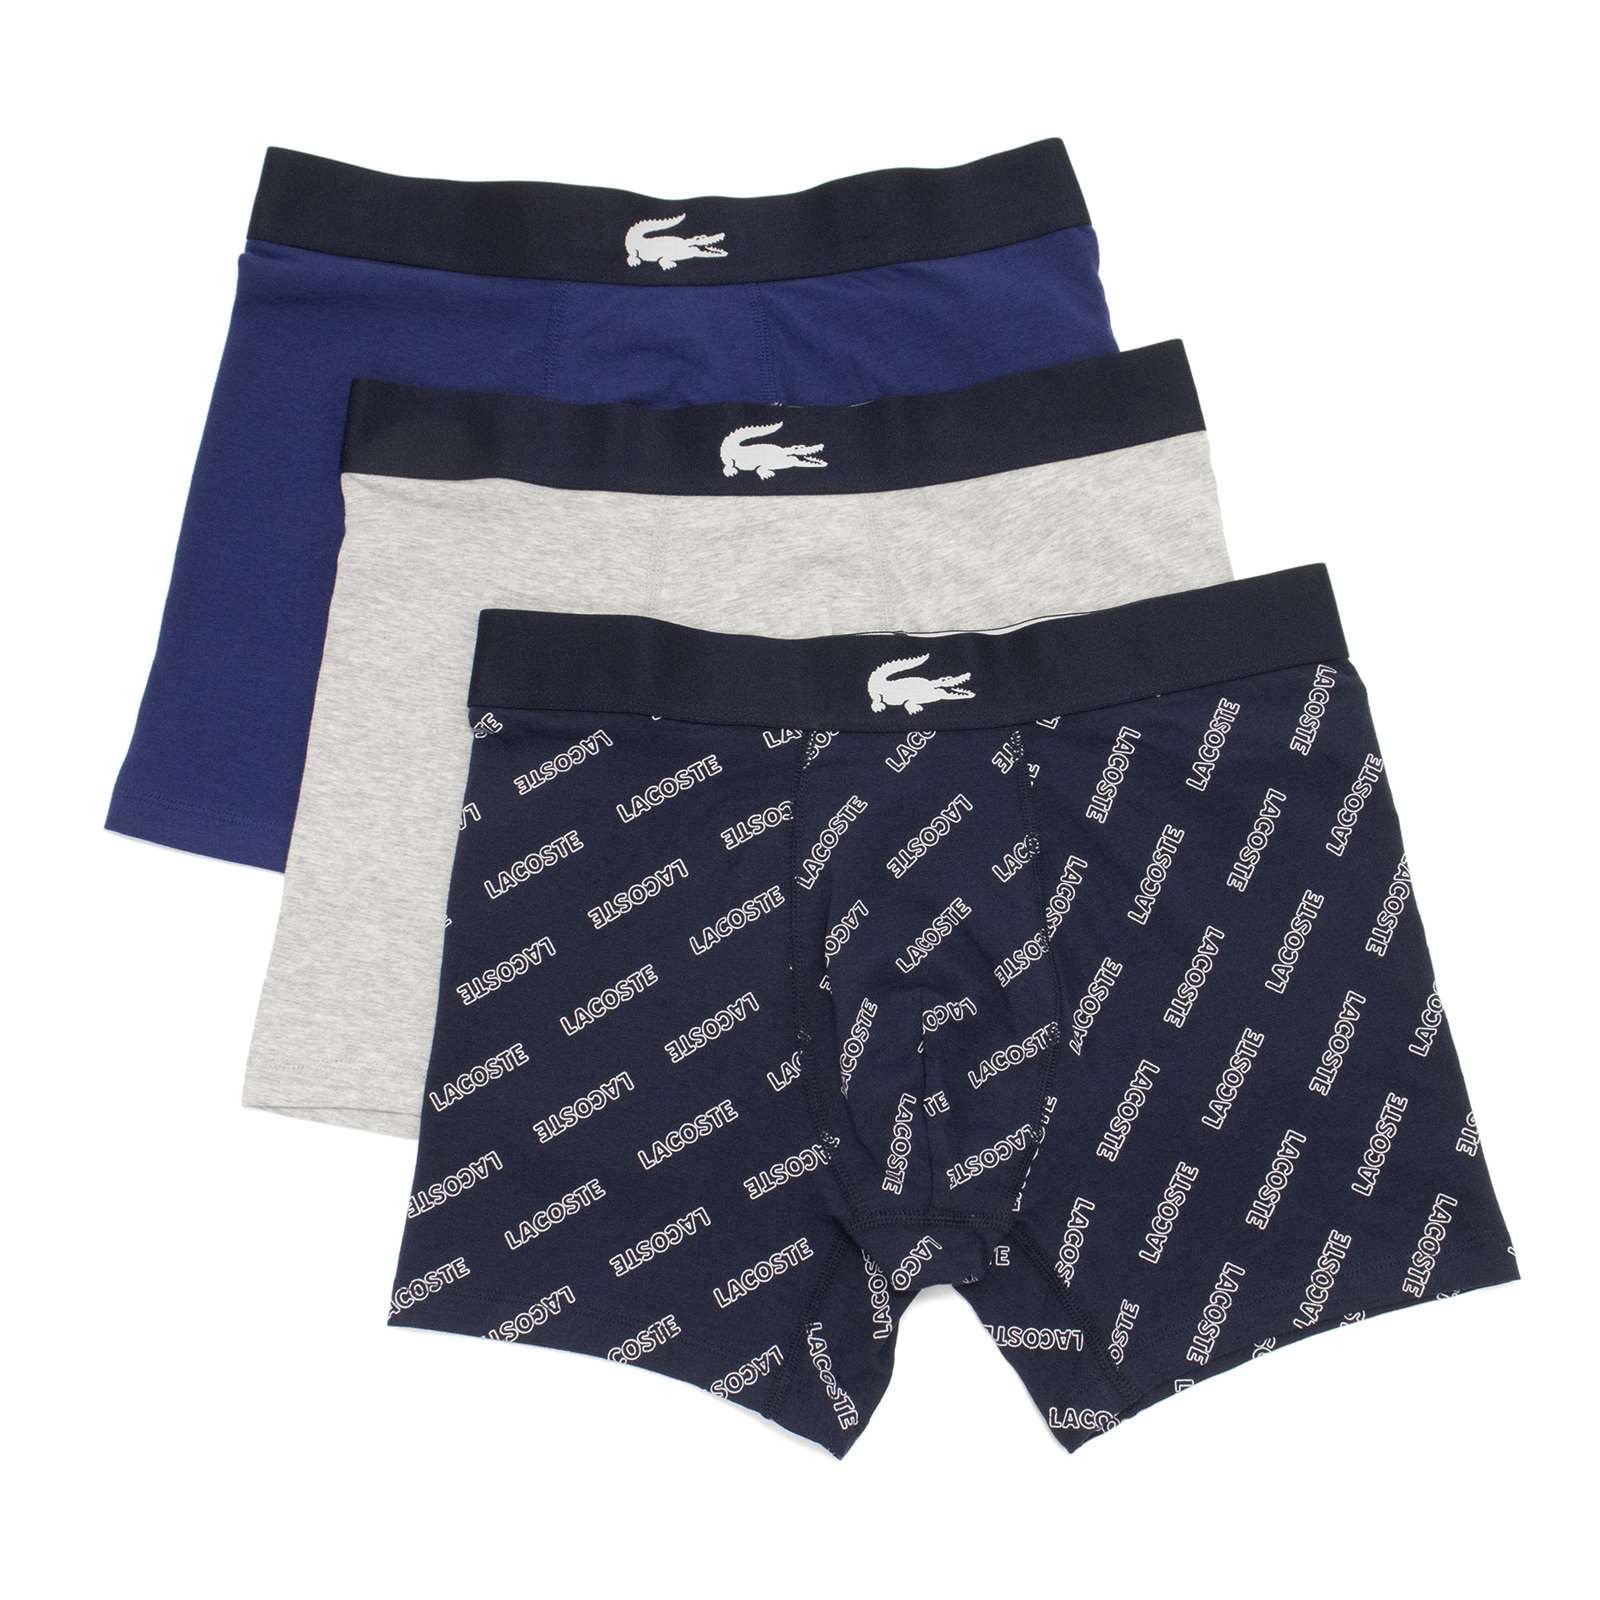 Lacoste Mens Boxer Shorts Pack of 3 